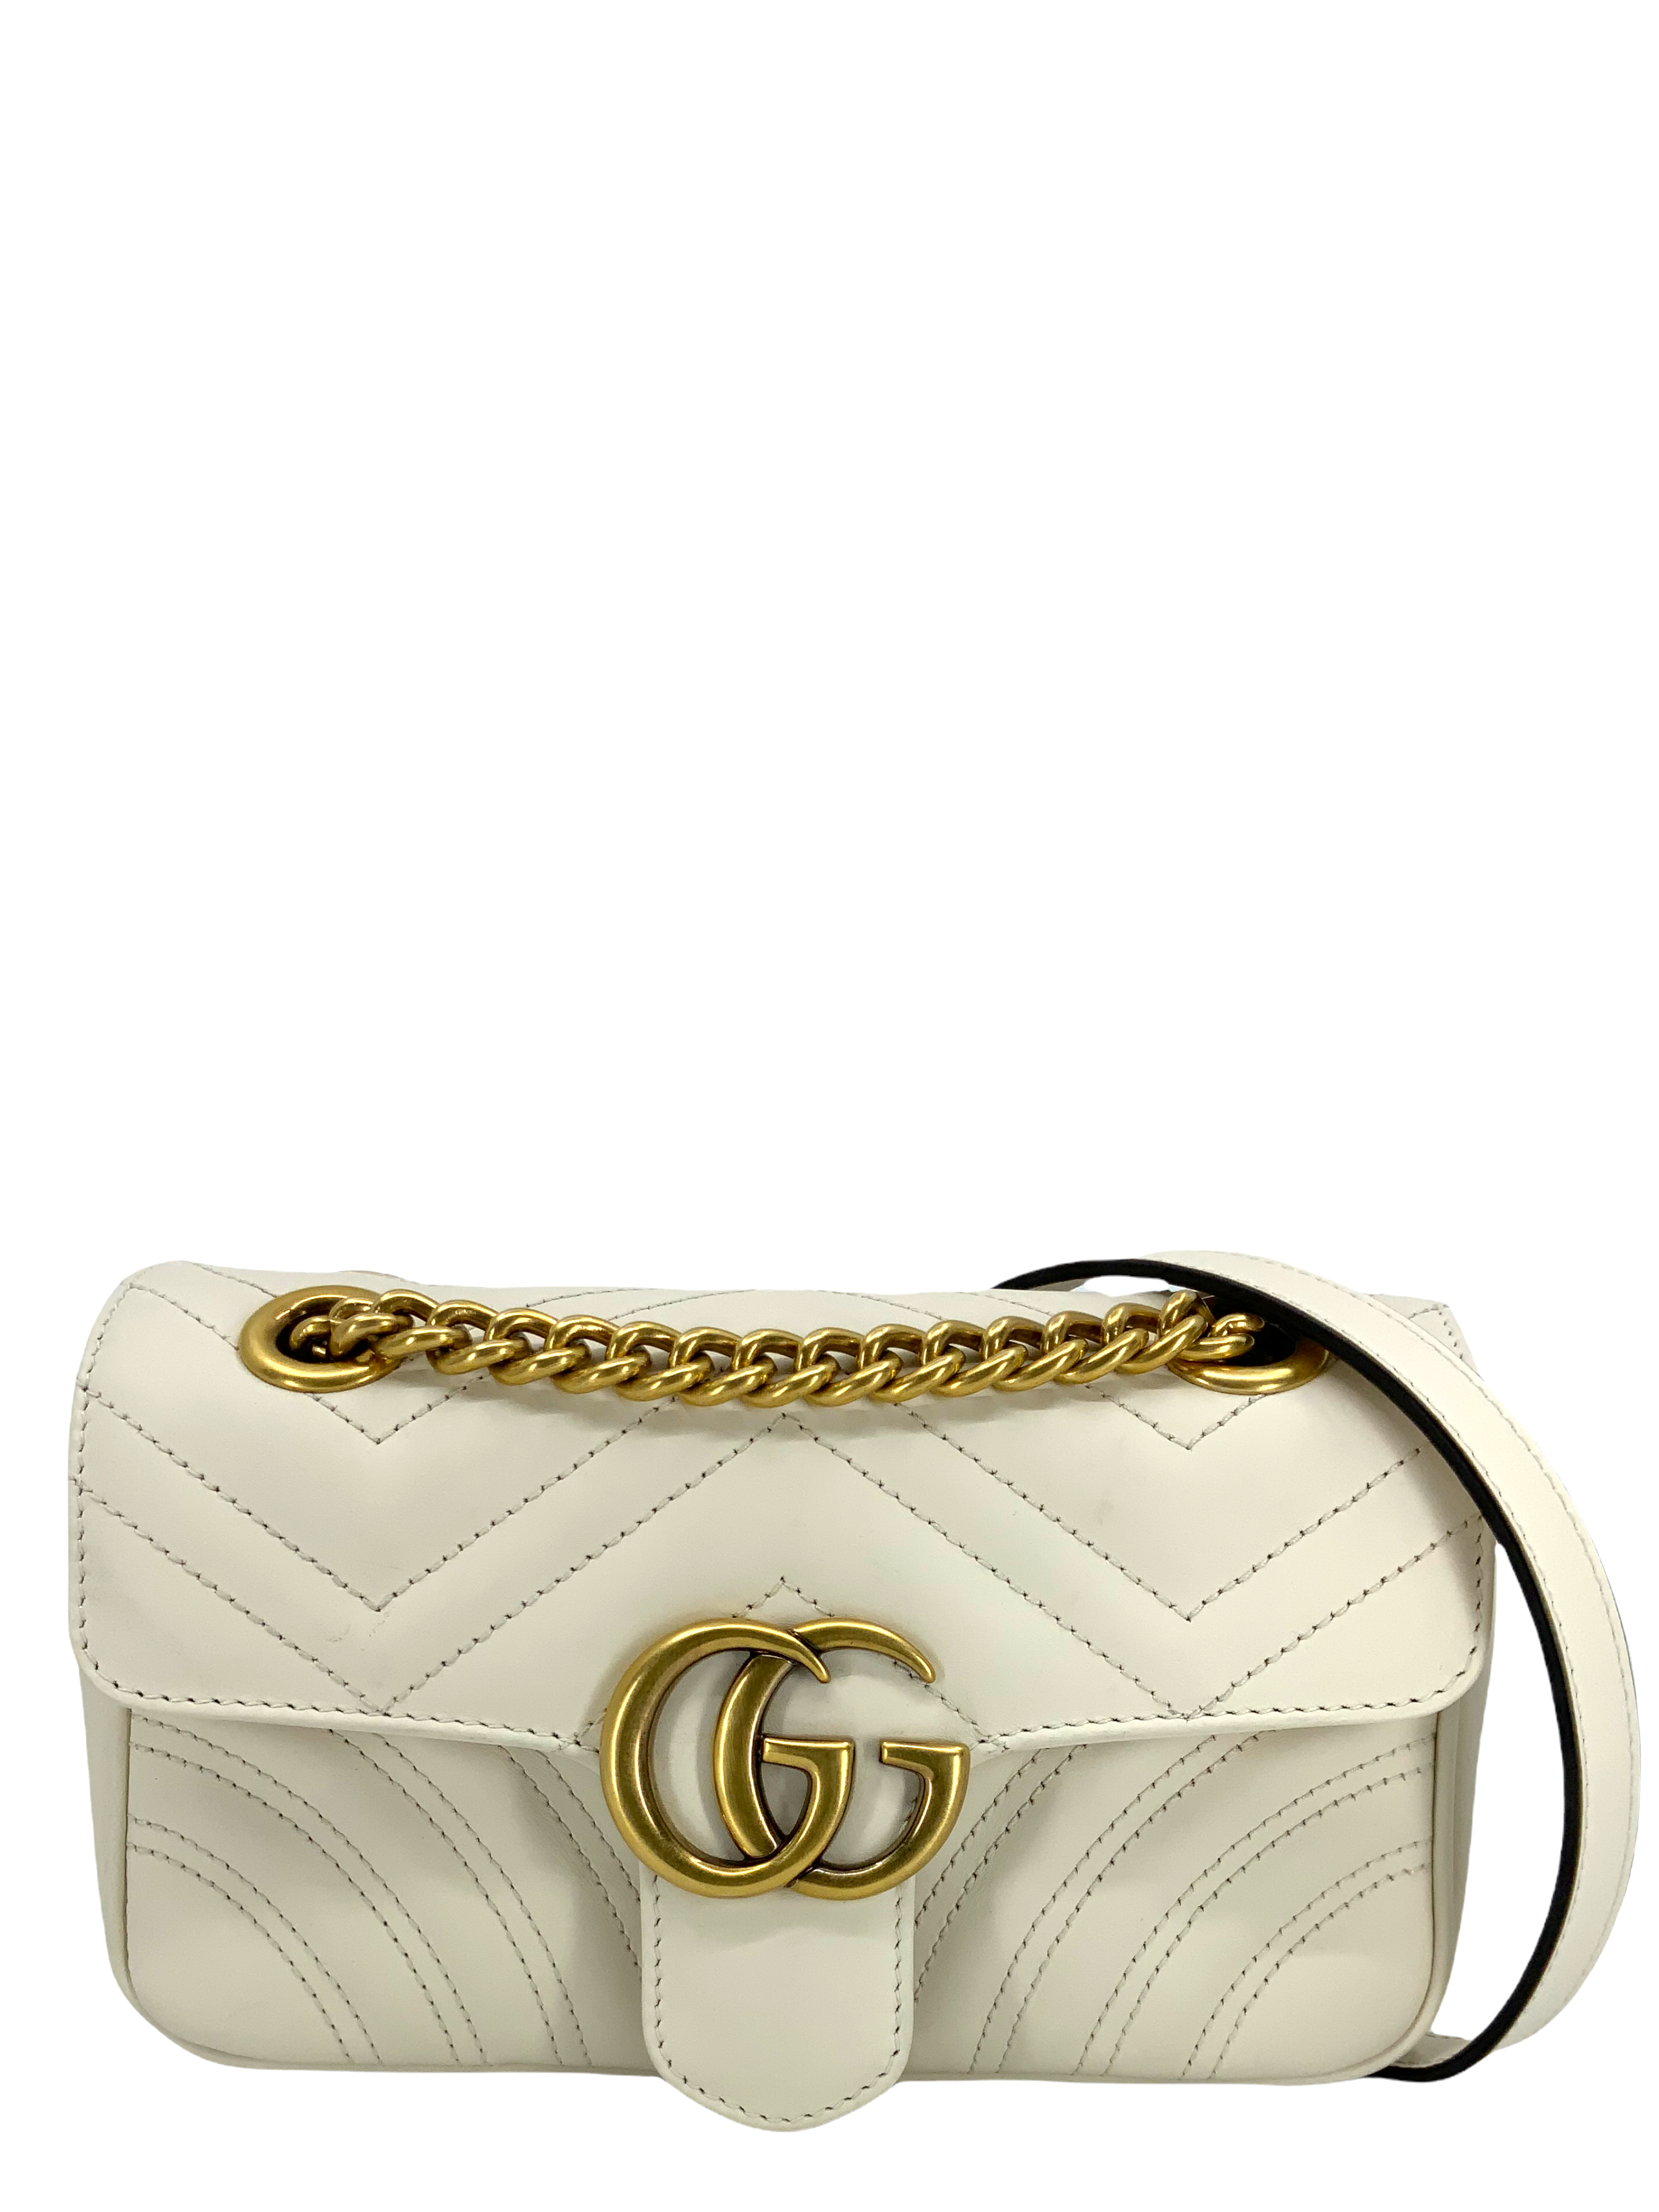 Buy Pre-owned & Brand new Luxury Gucci GG Marmont Matelasse